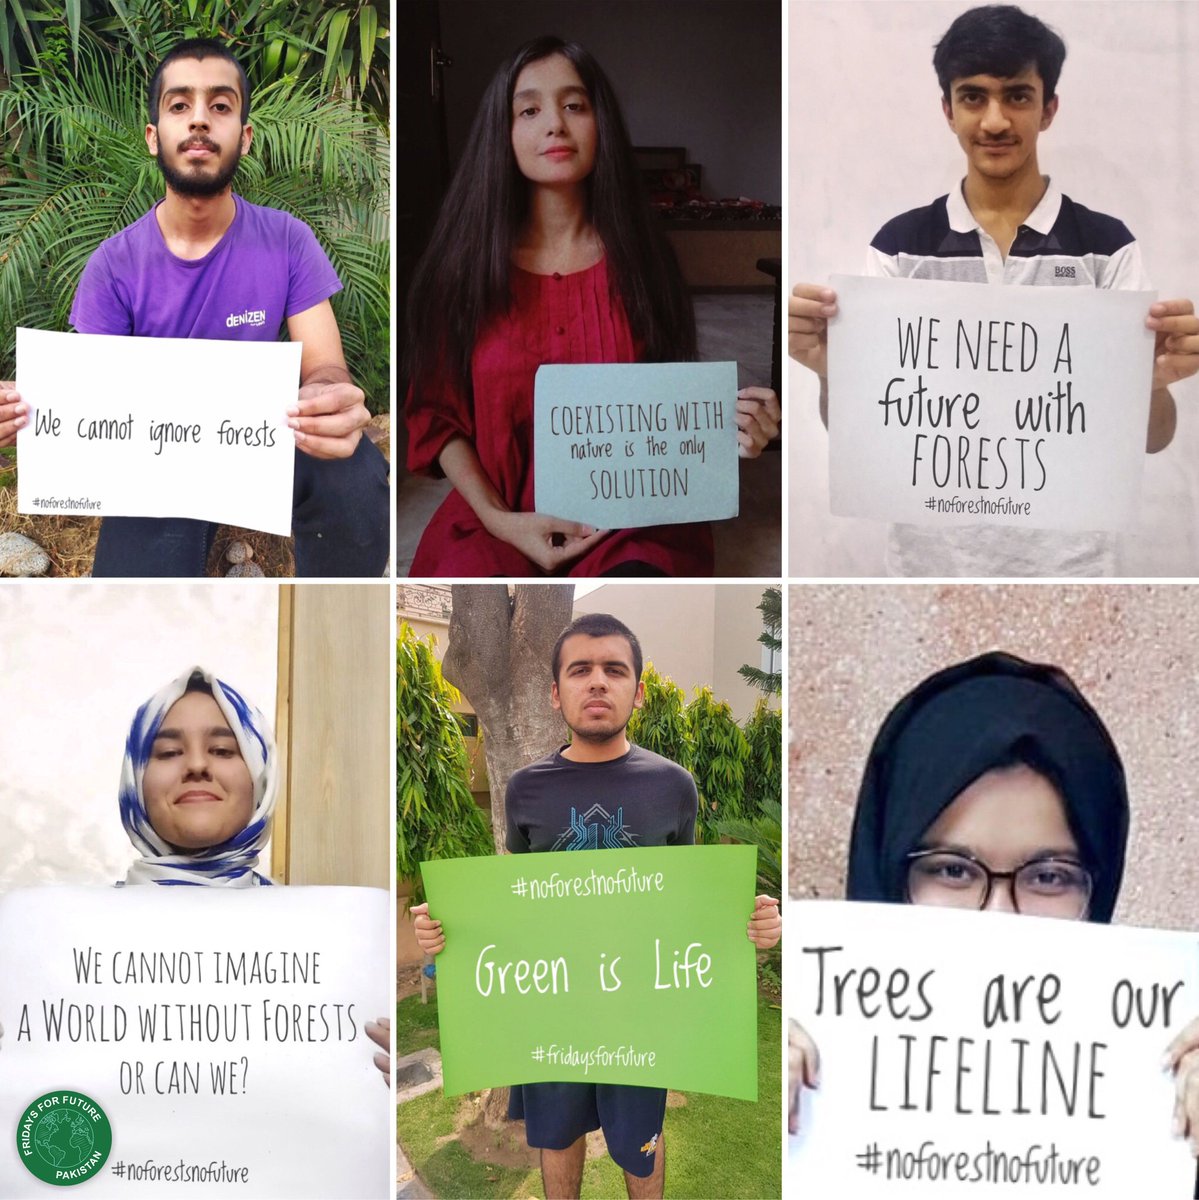 FridaysForFuture Pakistan and it's Activists took part in the #ForestForFuture Digital Strike Campaign this Friday.
#ClimateActionNow